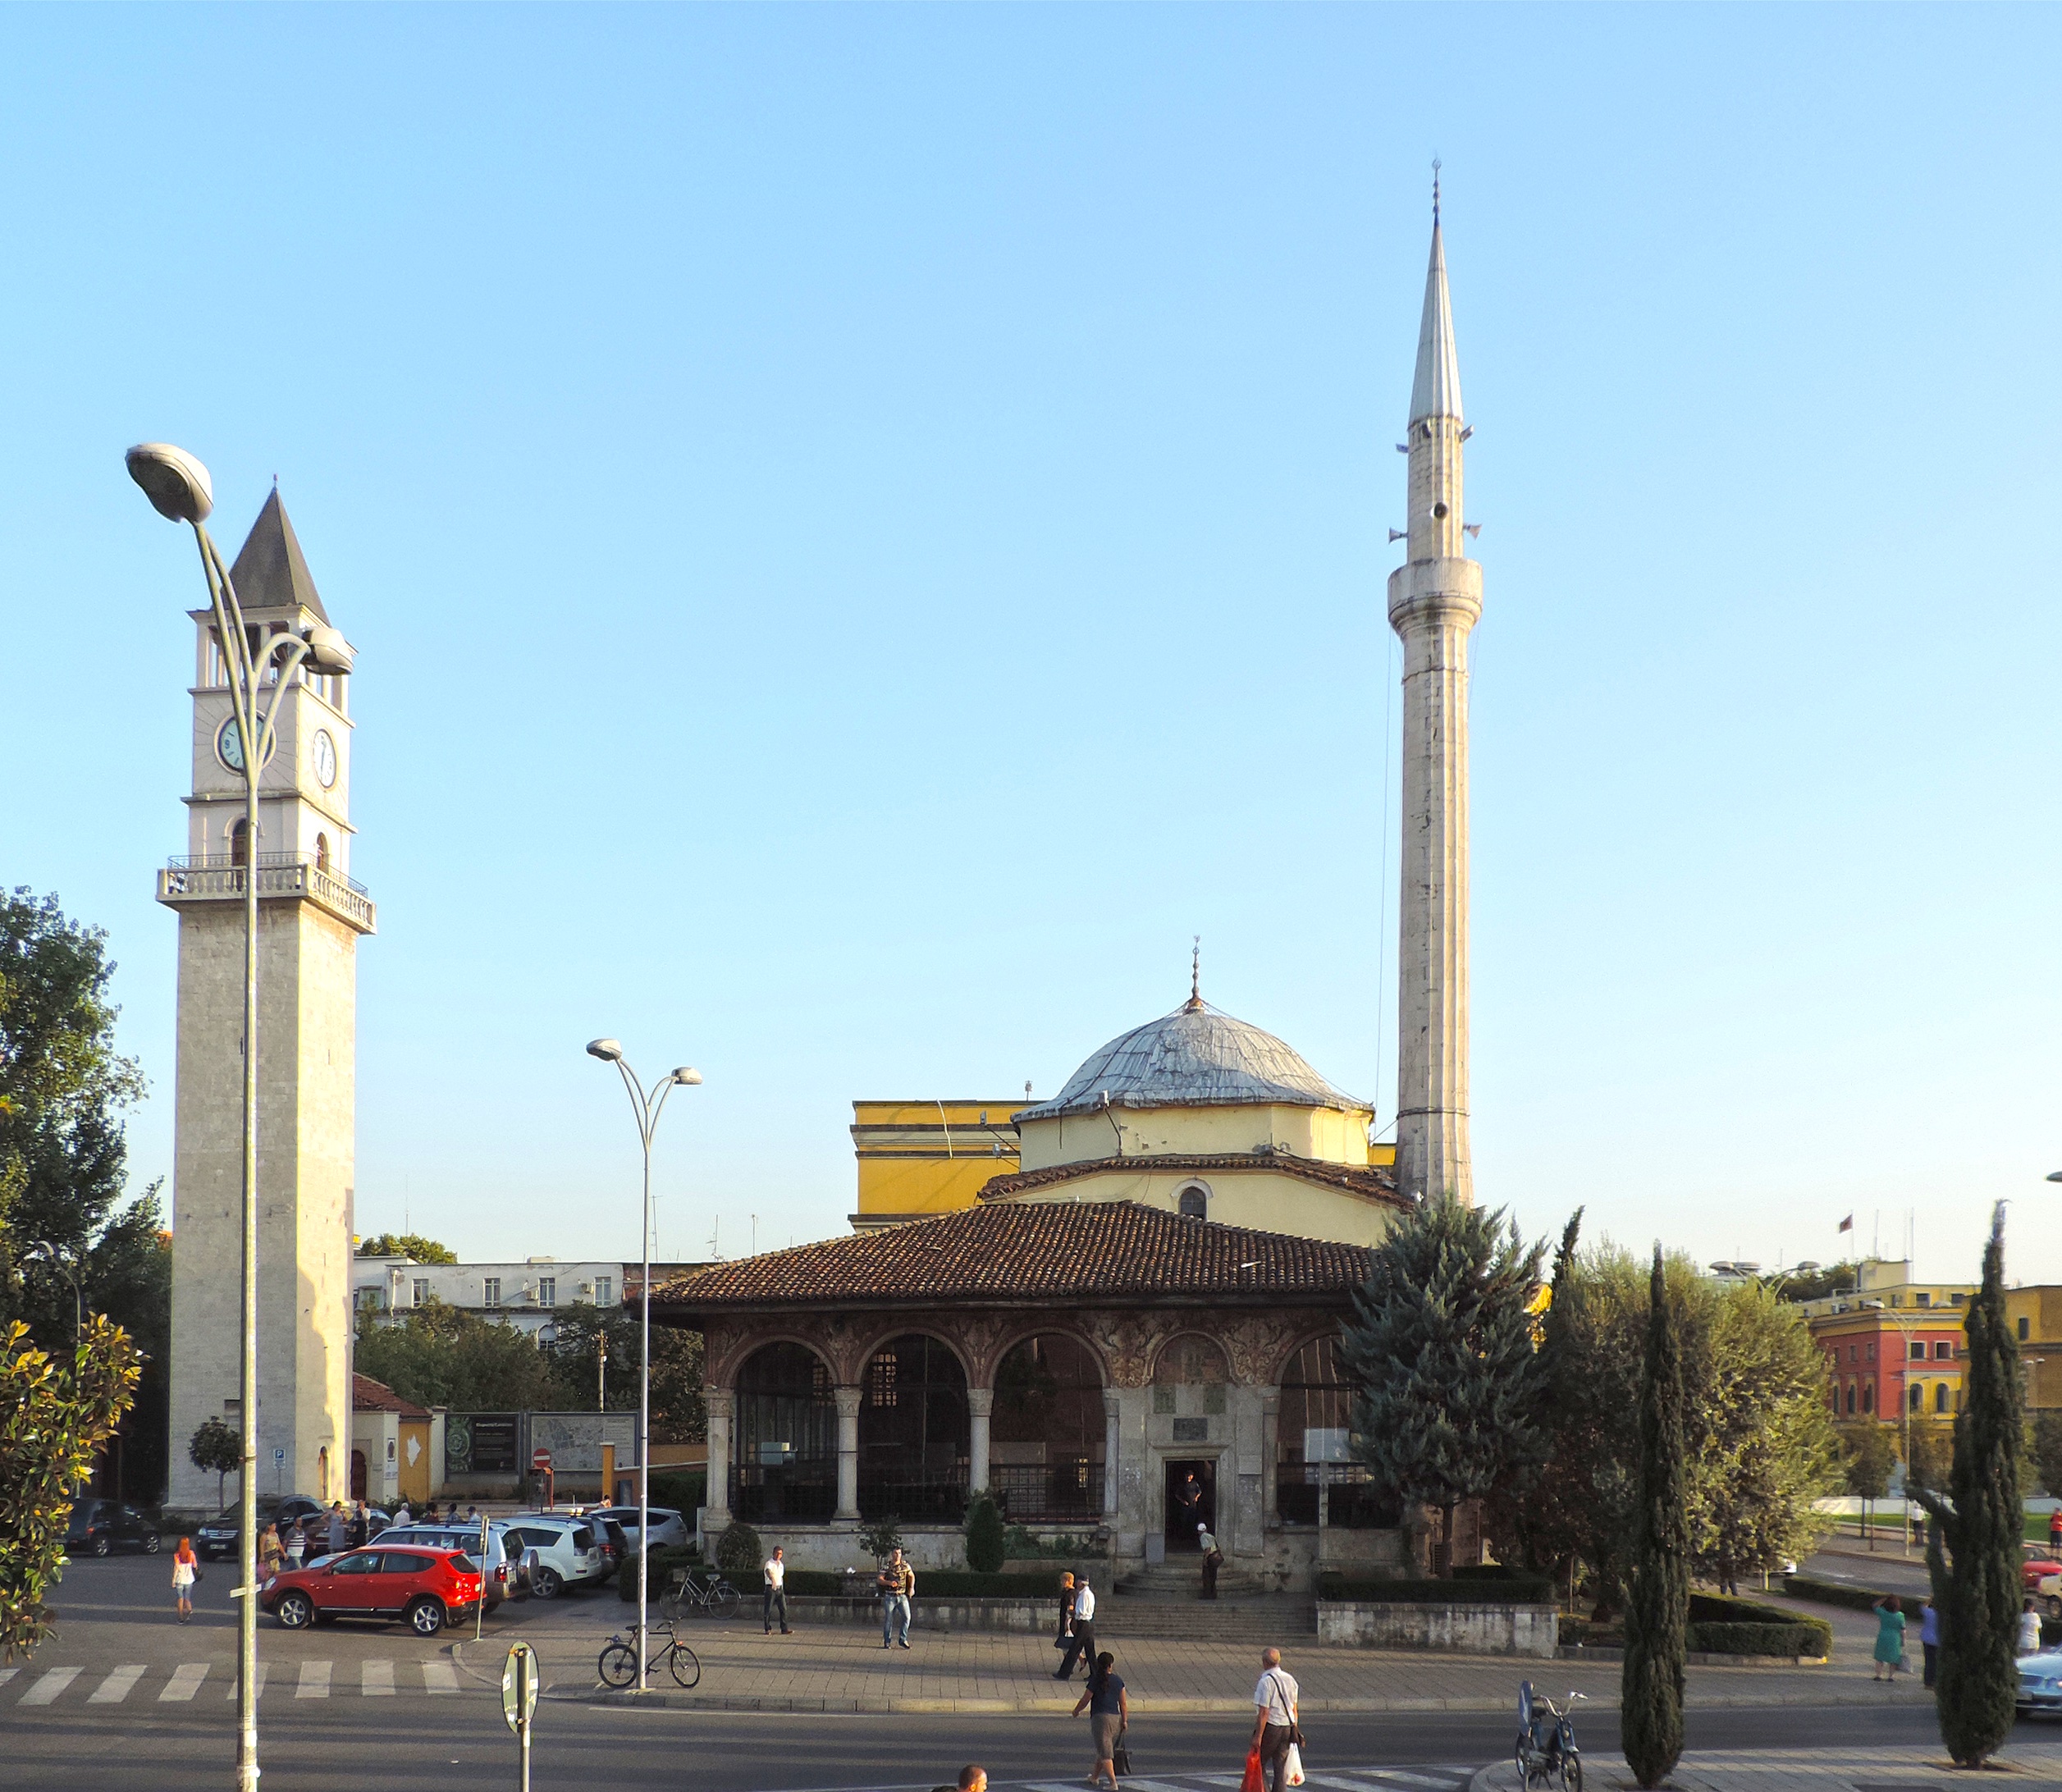 <p>Facing Skanderbeg Square, beside the Ottoman-era clock tower, this important mosque was spared the destruction of religious sites under Enver Hoxha. Dating from the late 18th century and completed in 1821, it is one of the few historic religious buildings remaining in the capital. It is notable for its delicate wall paintings, which form a frieze below the porch eaves on the exterior. The adjacent clock tower was built in the 1820s.</p>